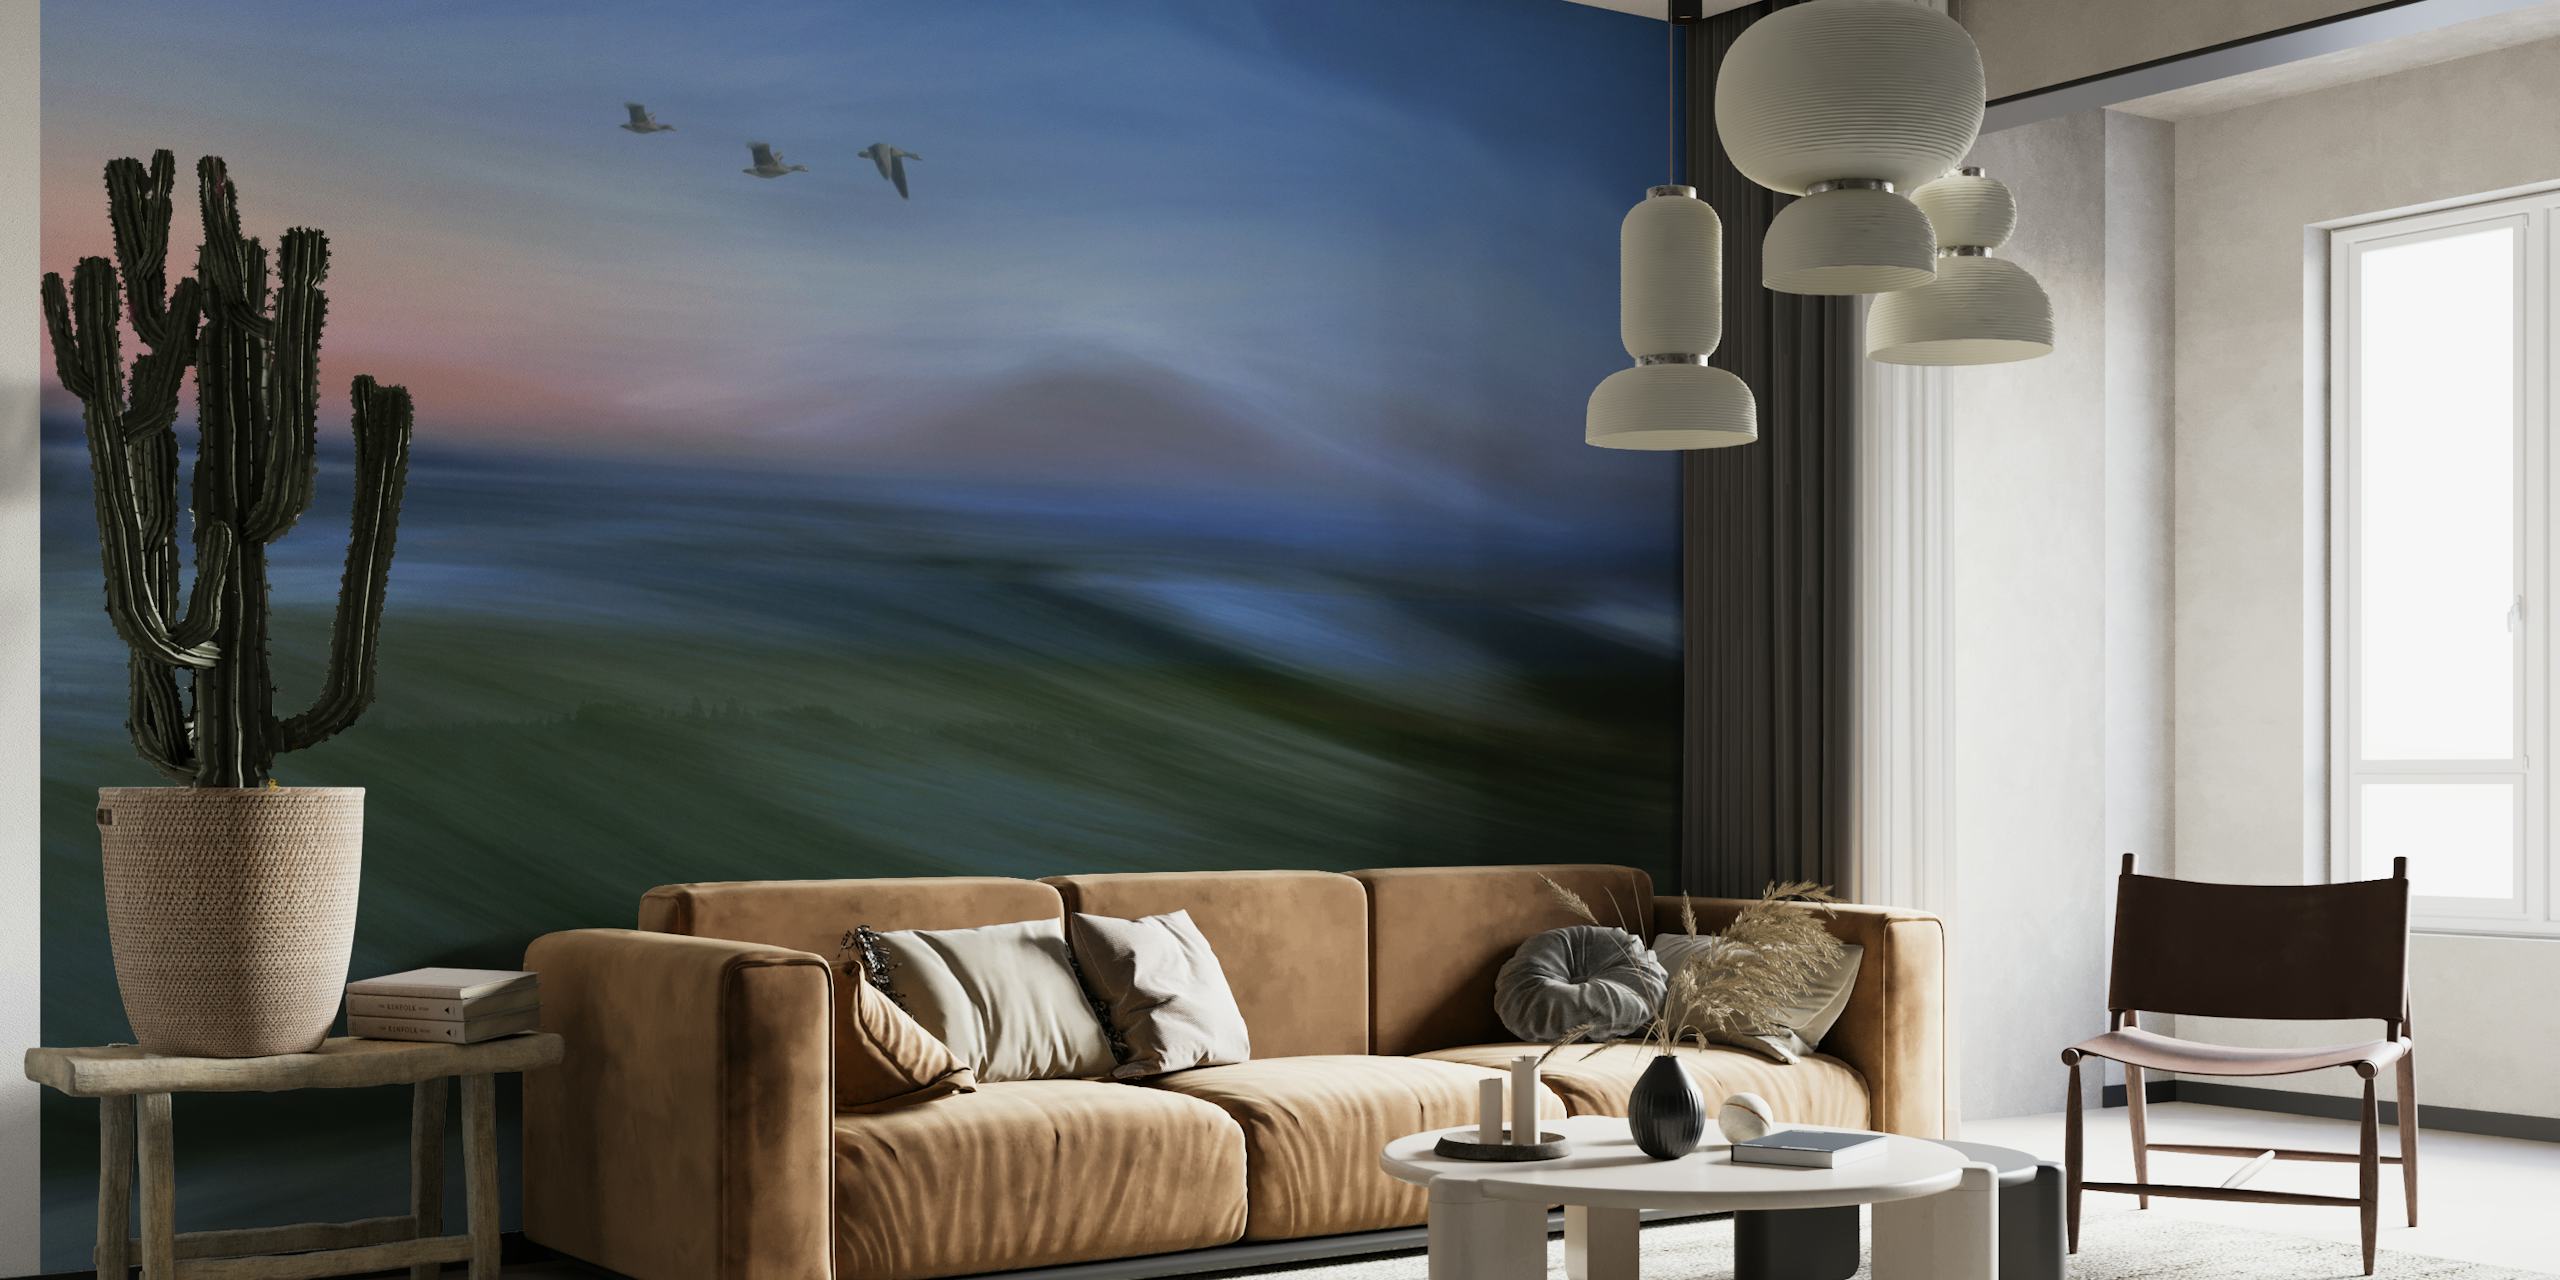 Abstract twilight landscape wall mural with birds in motion